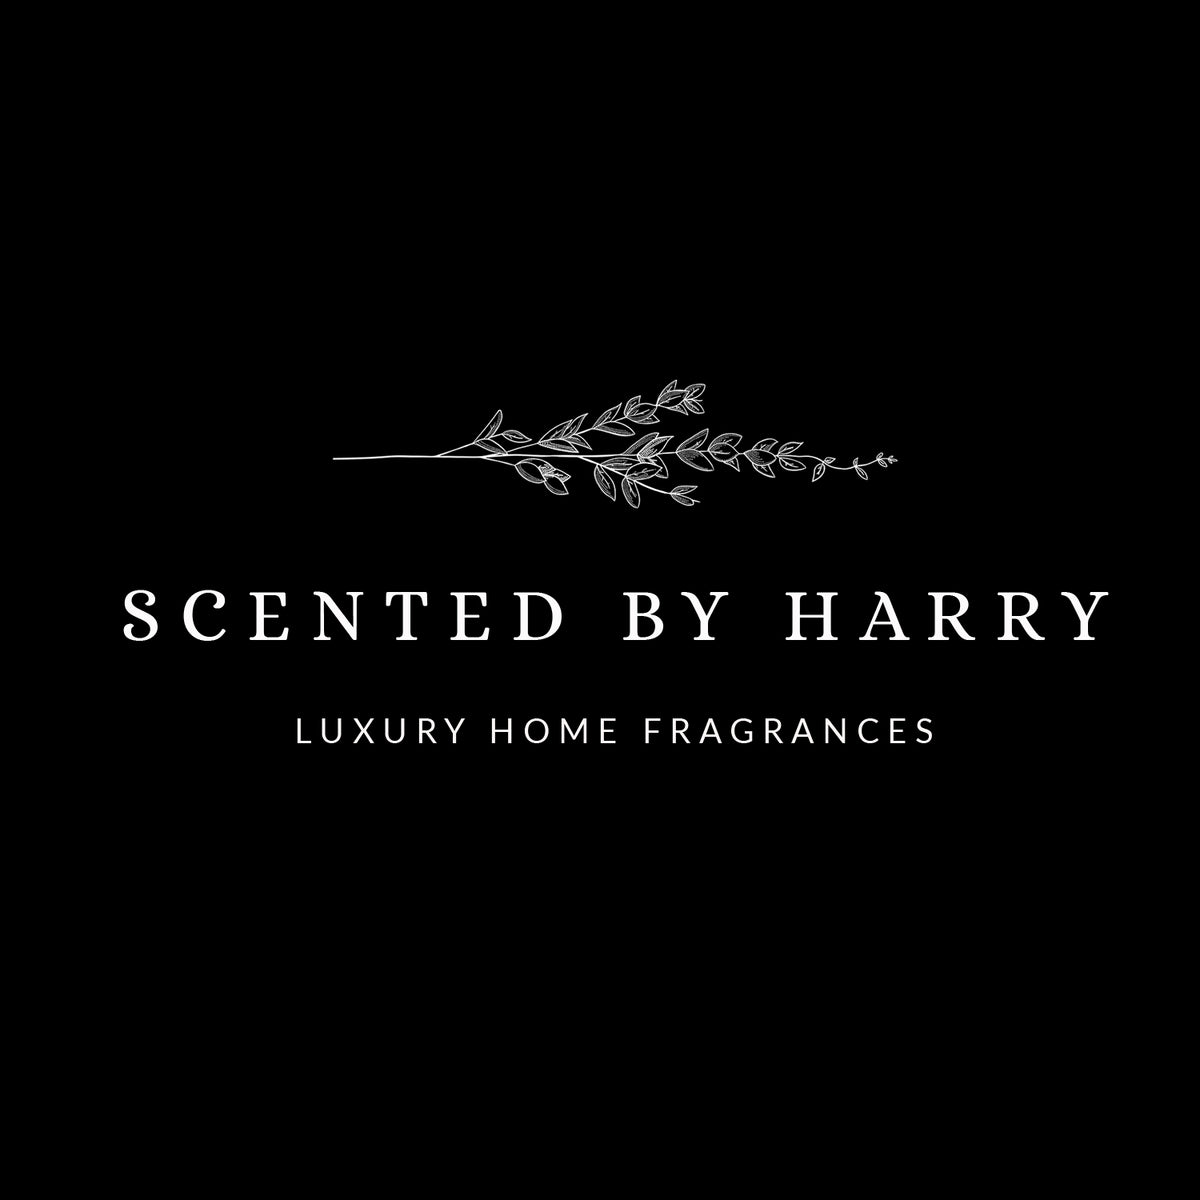 Scented by Harry